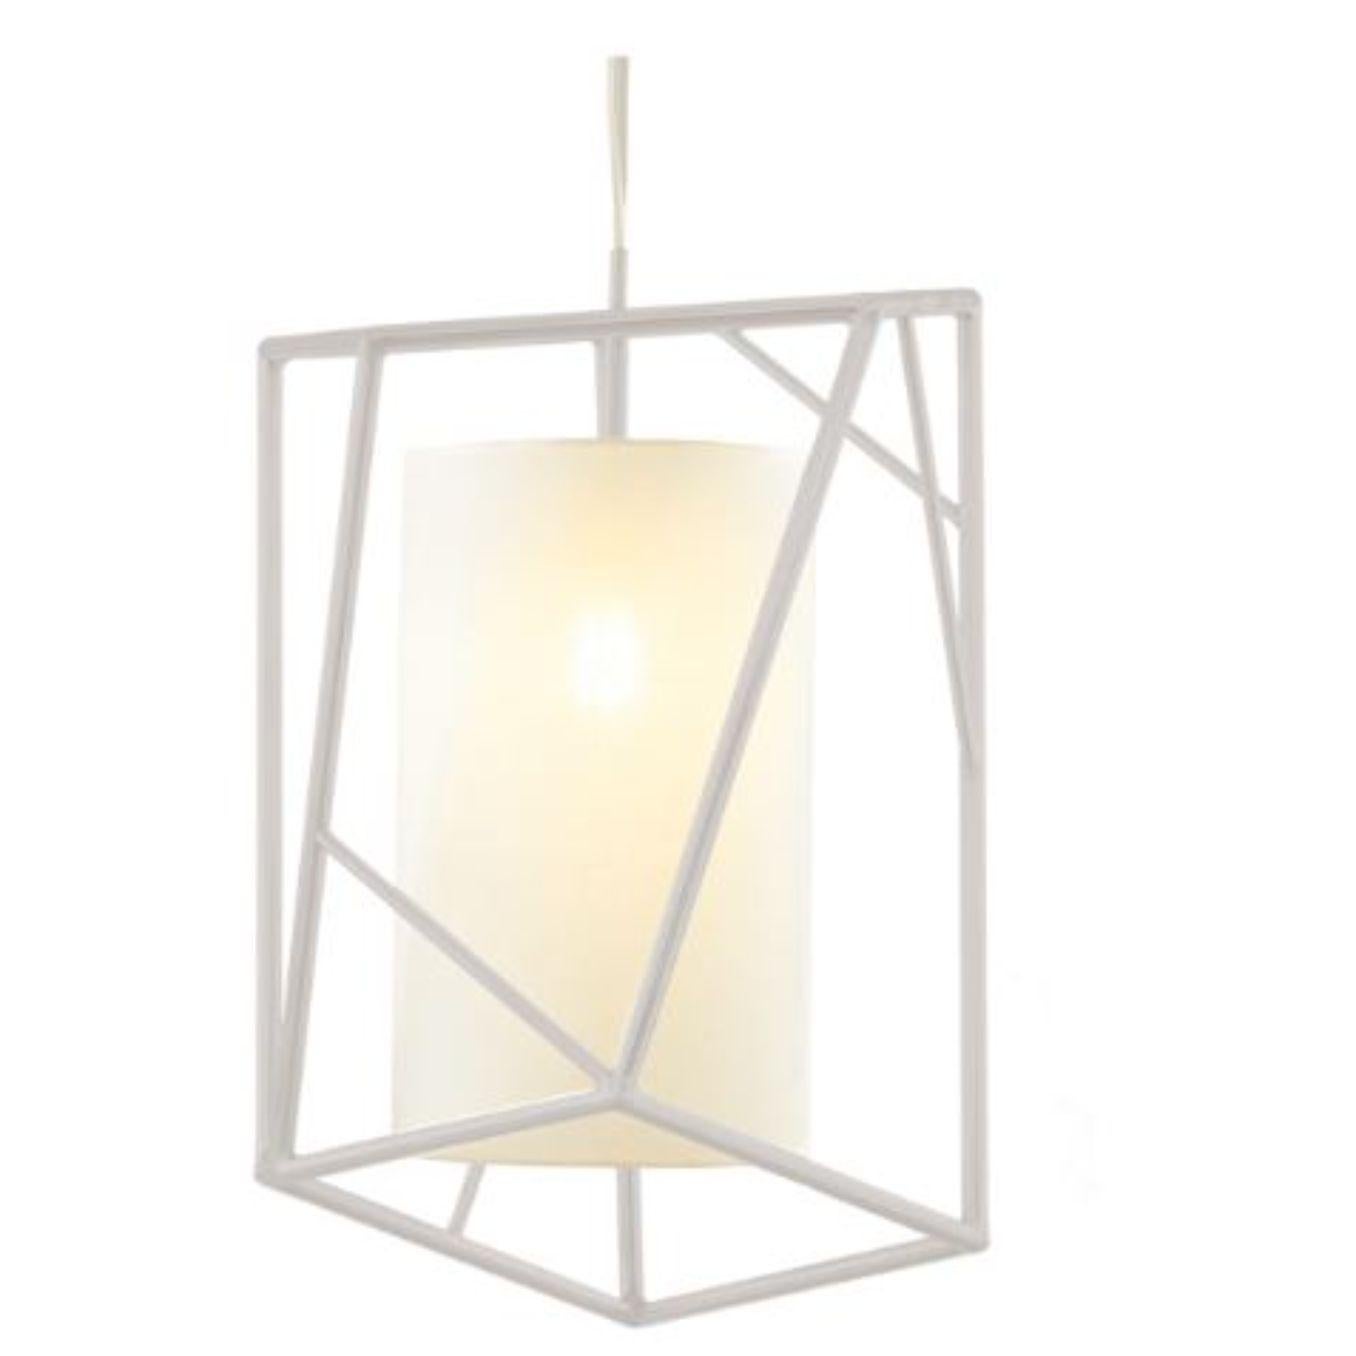 Taupe star III suspension lamp by Dooq
Dimensions: W 35 x D 35 x H 53 cm
Materials: lacquered metal, polished or satin metal.
Abat-jour: linen
Also available in different colors and materials.

Information:
230V/50Hz
E27/1x15W